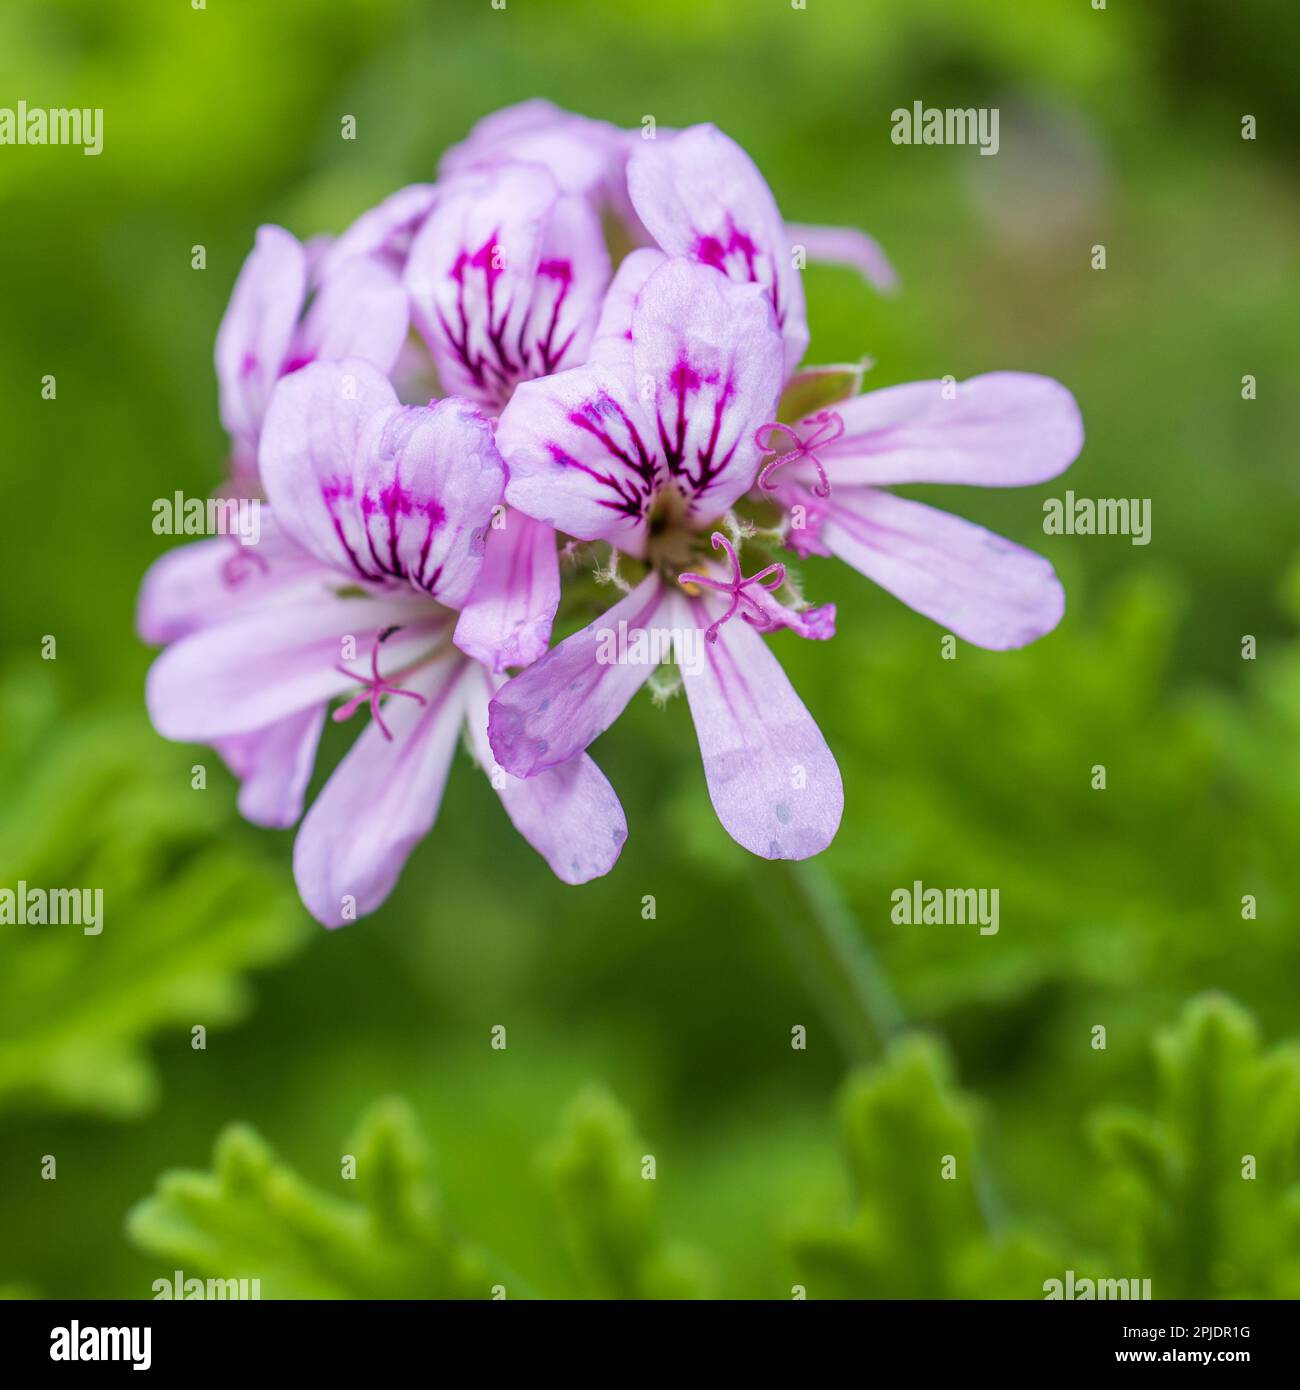 Flora of Israel. Square frame. Pelargonium graveolens is a Pelargonium species native to the Cape Provinces and the Northern Provinces of South Africa Stock Photo